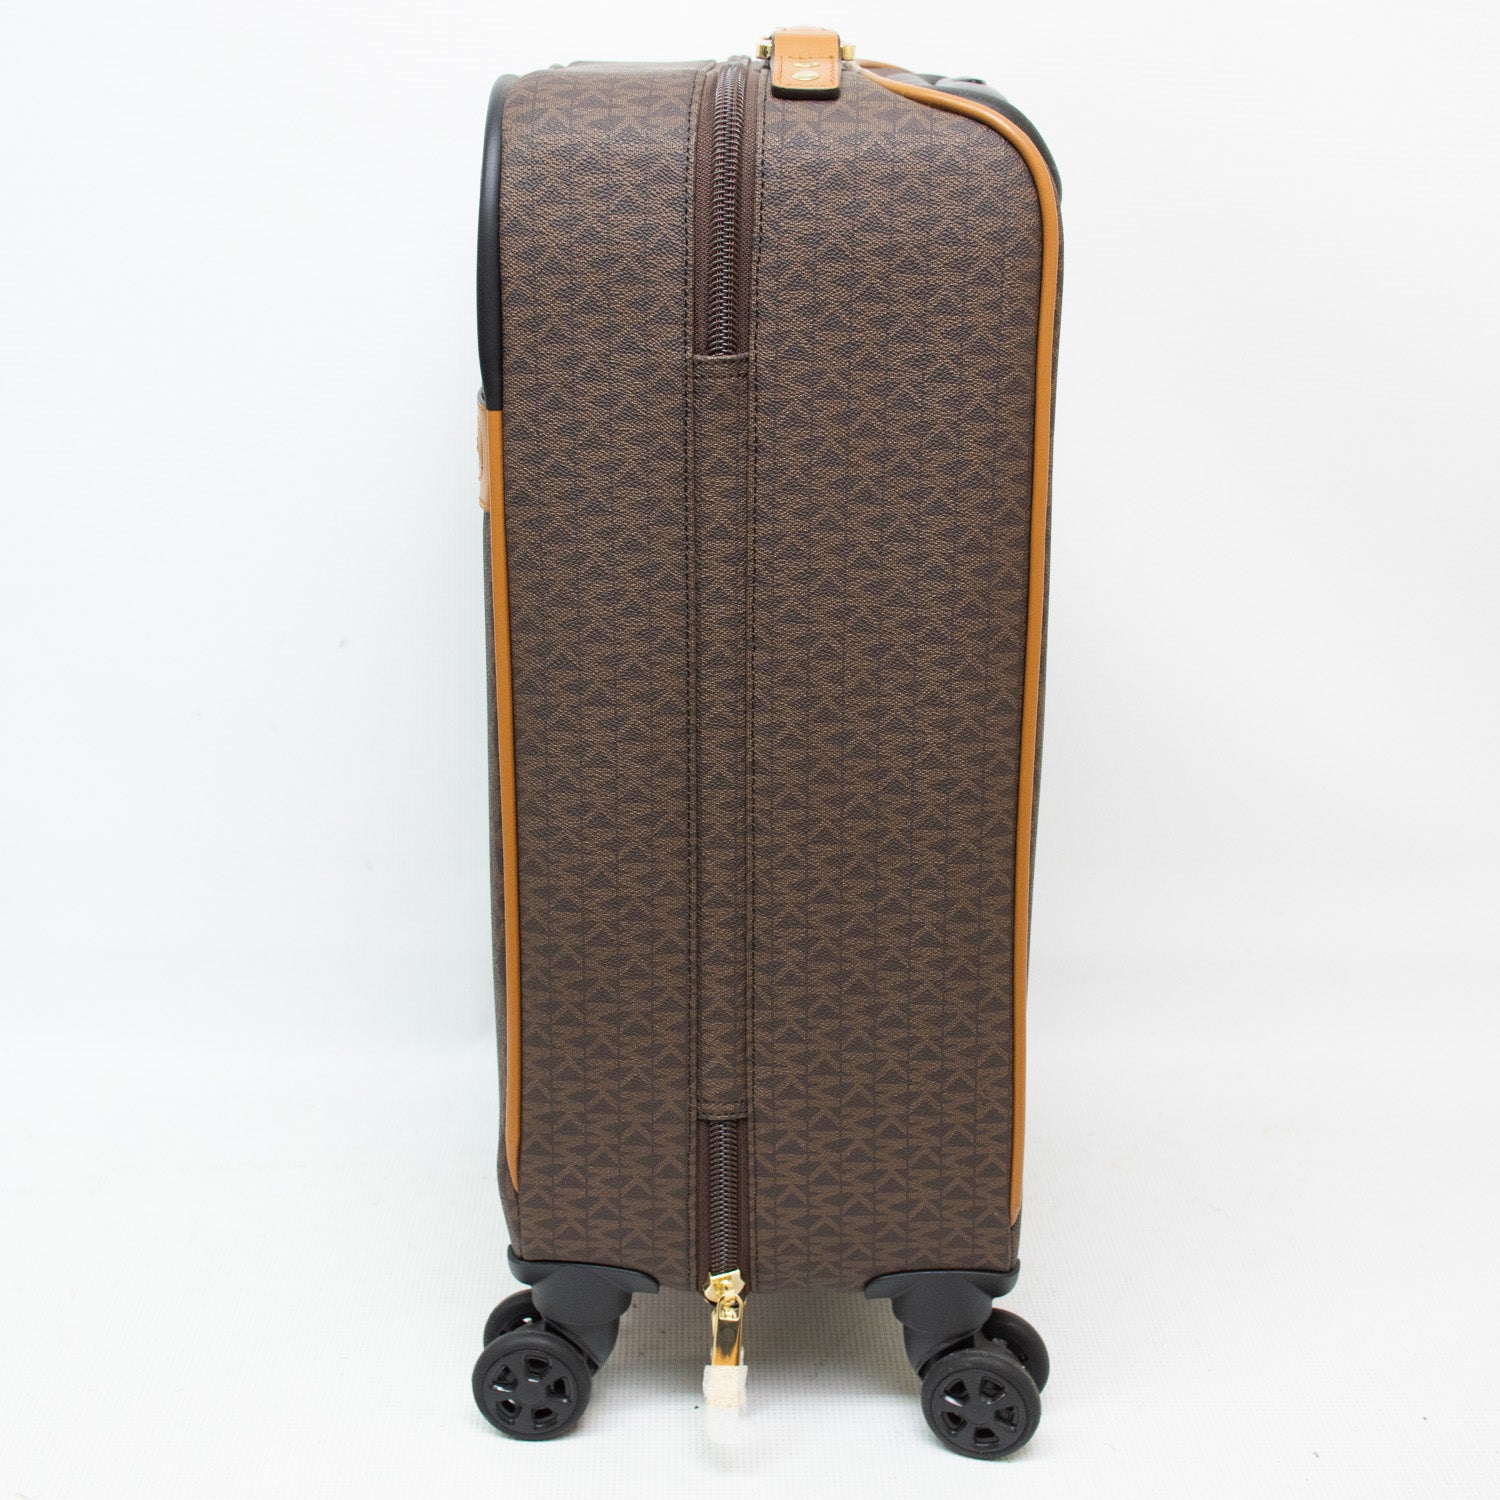 Michael Kors Signature Travel Trolley Carry-On Suitcase - Brown - 35F8GTFN1B